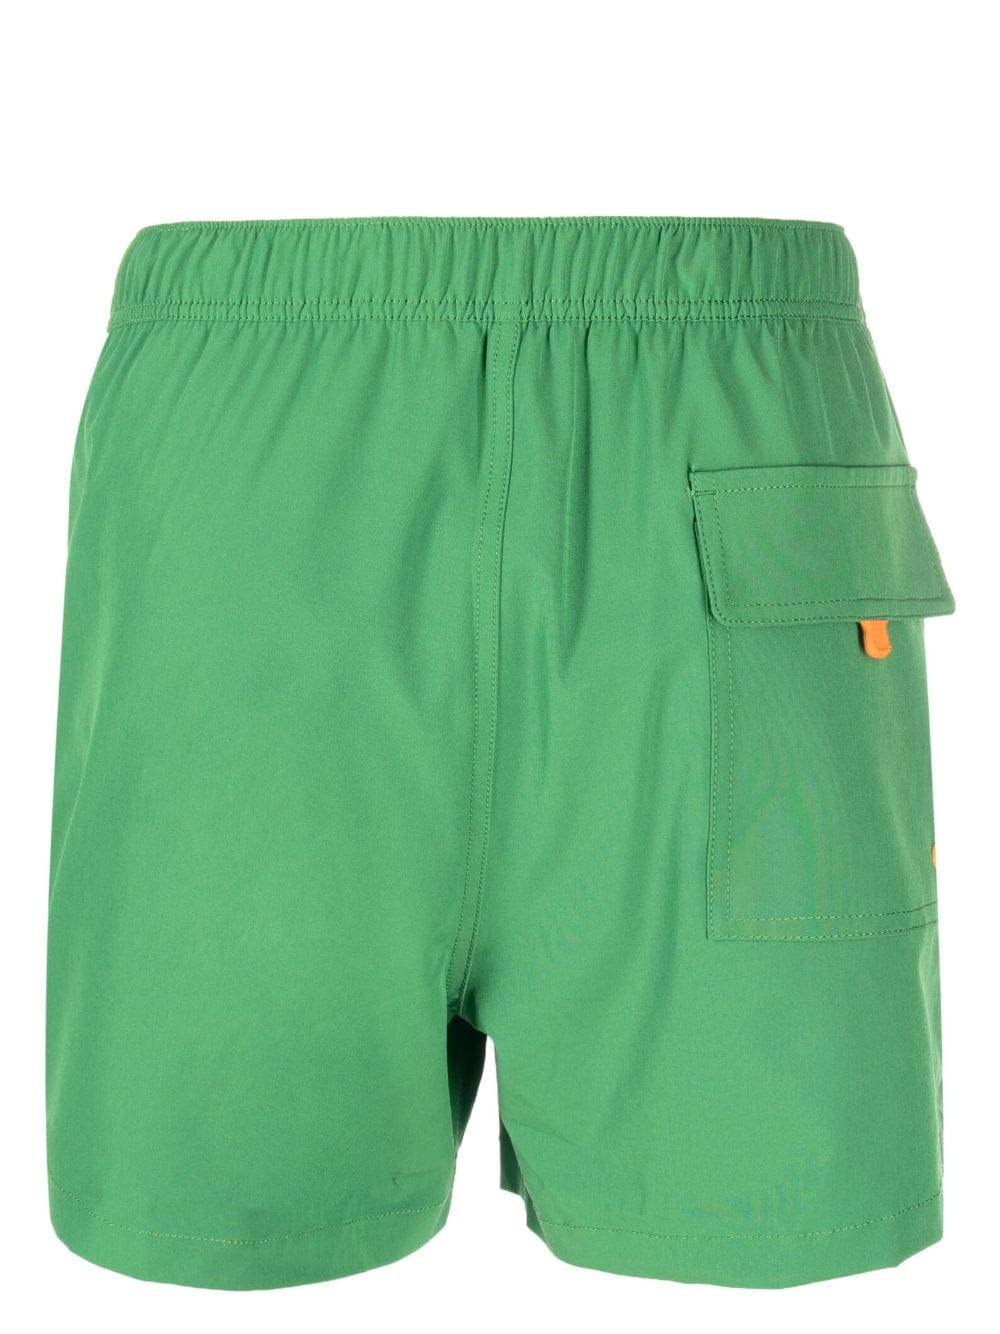 SAVE THE DUCK LOGO COSTUME SHORTS